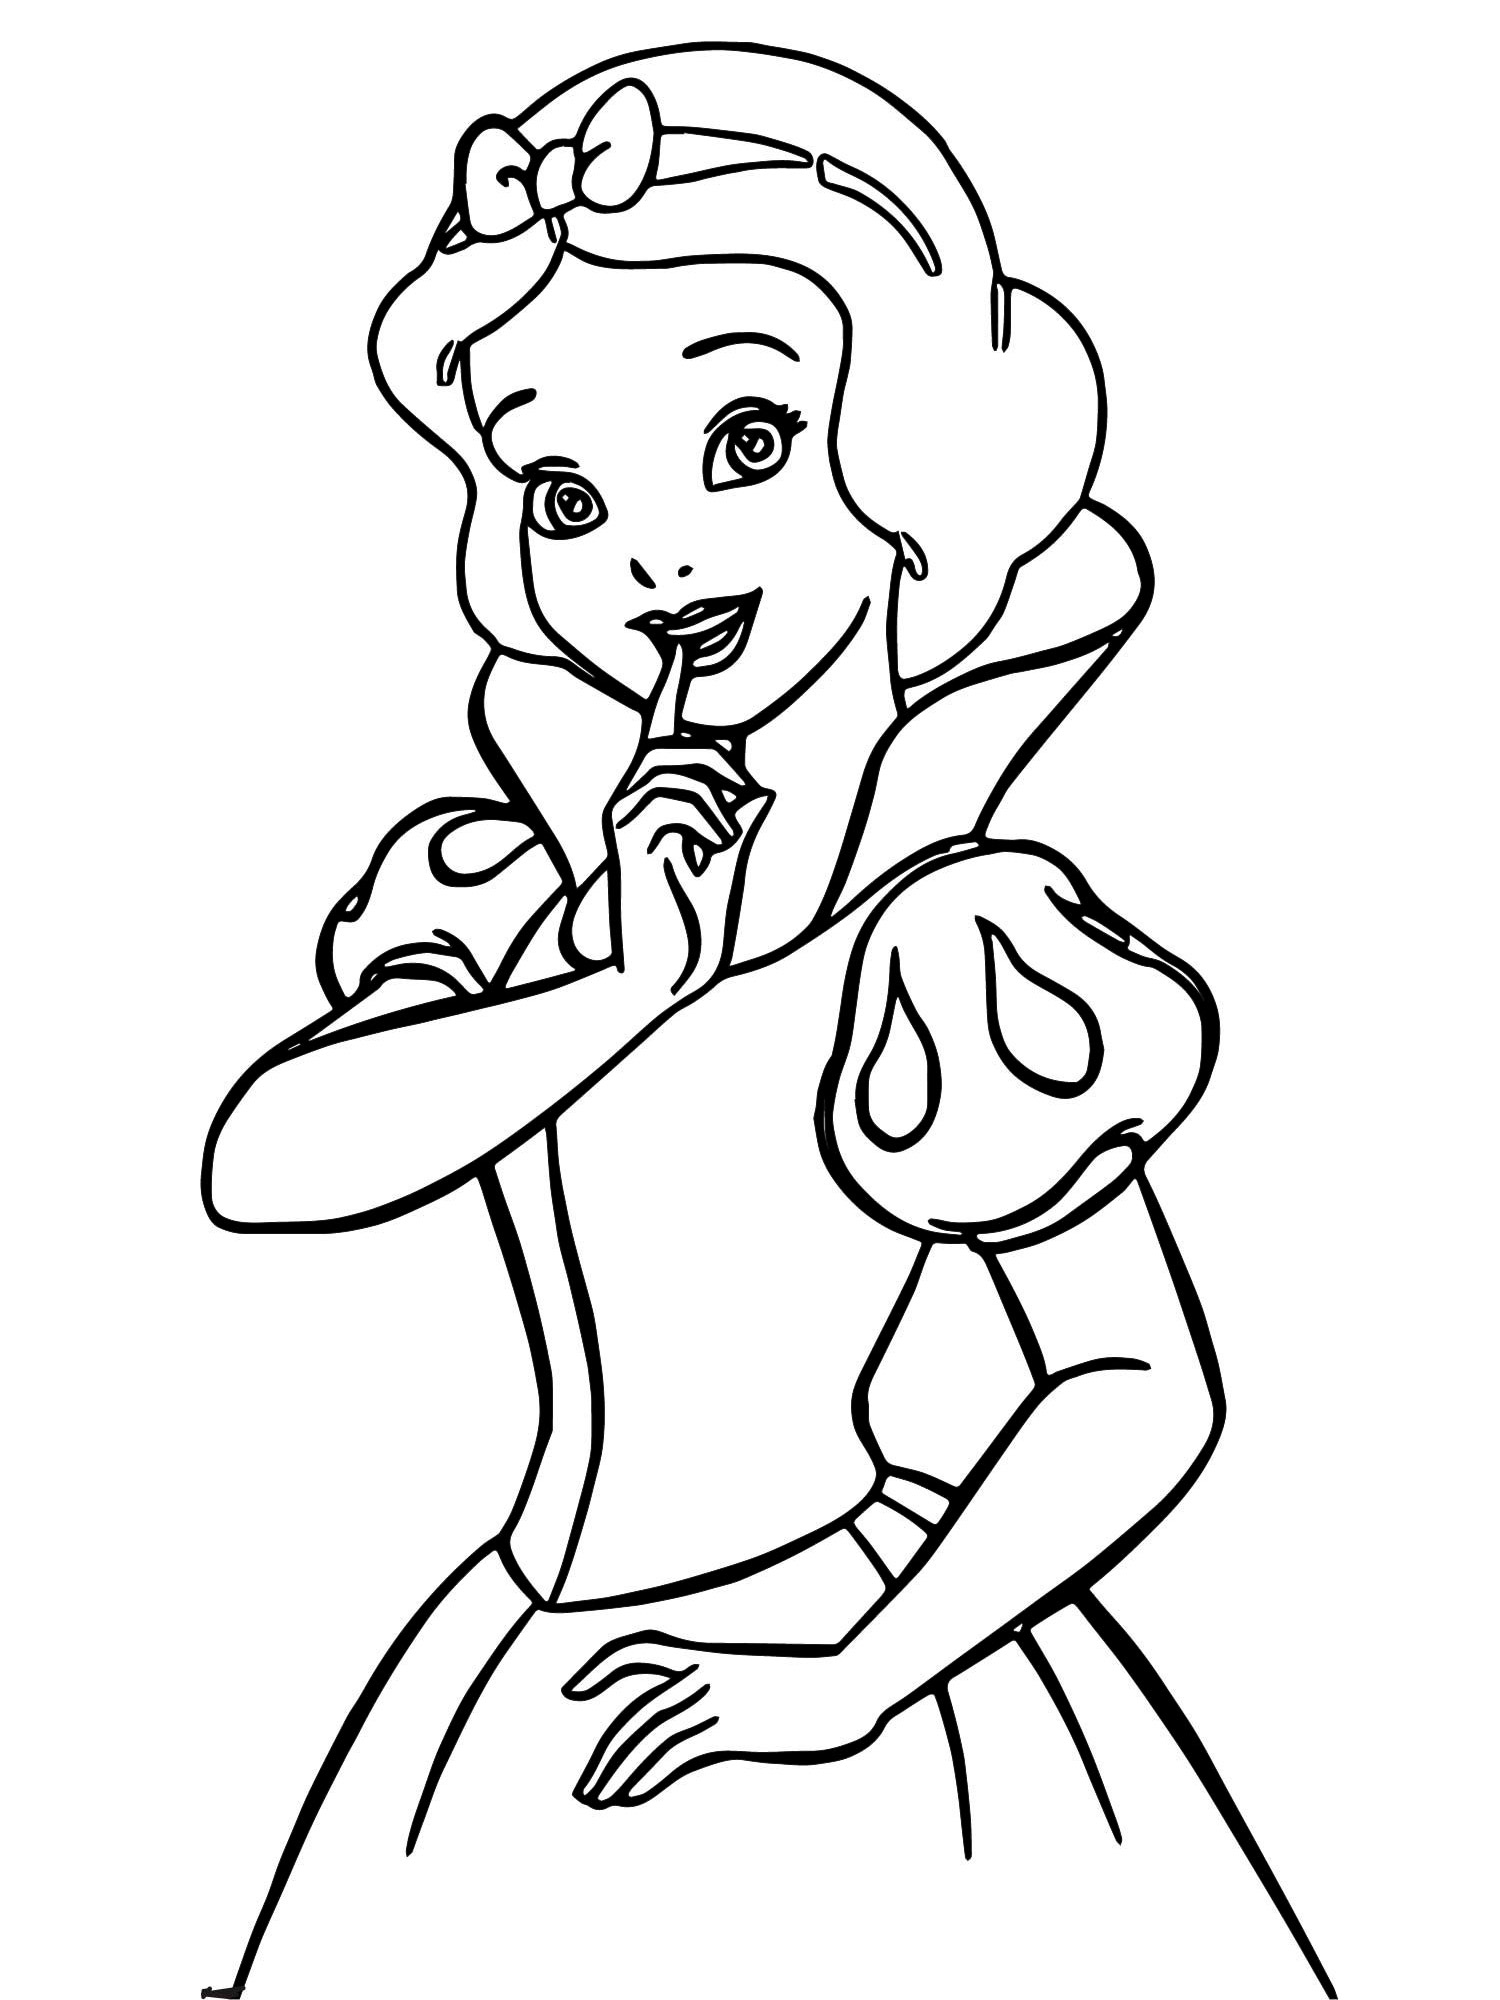 Snow white coloring pages. Download and print Snow white coloring pages.